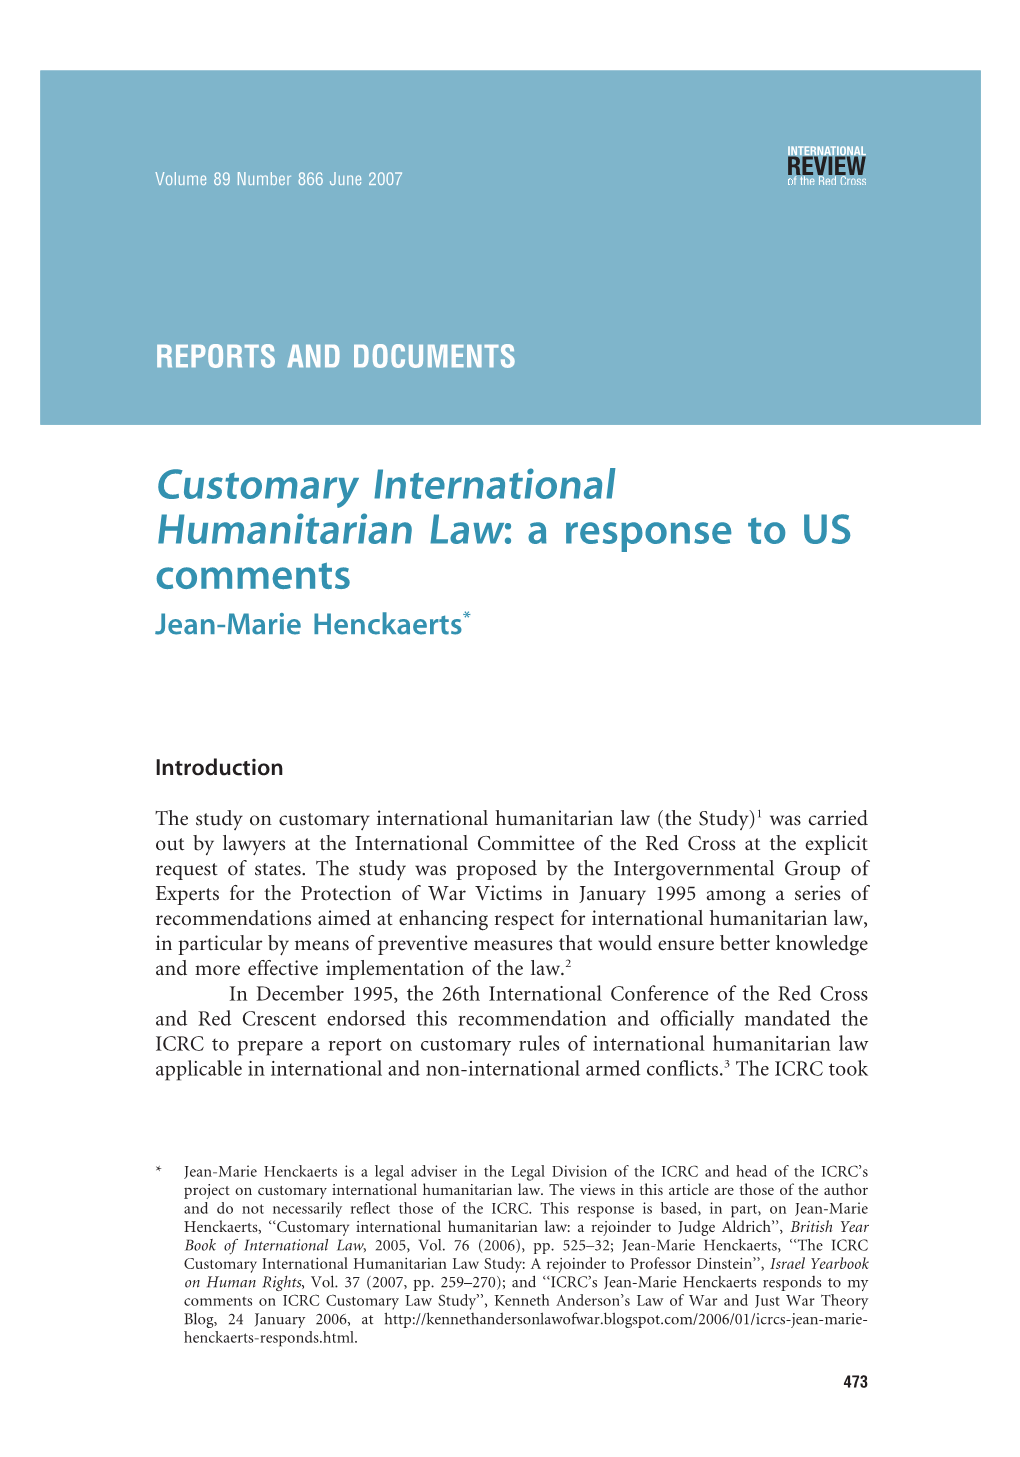 Customary International Humanitarian Law: a Response to US Comments Jean-Marie Henckaerts*